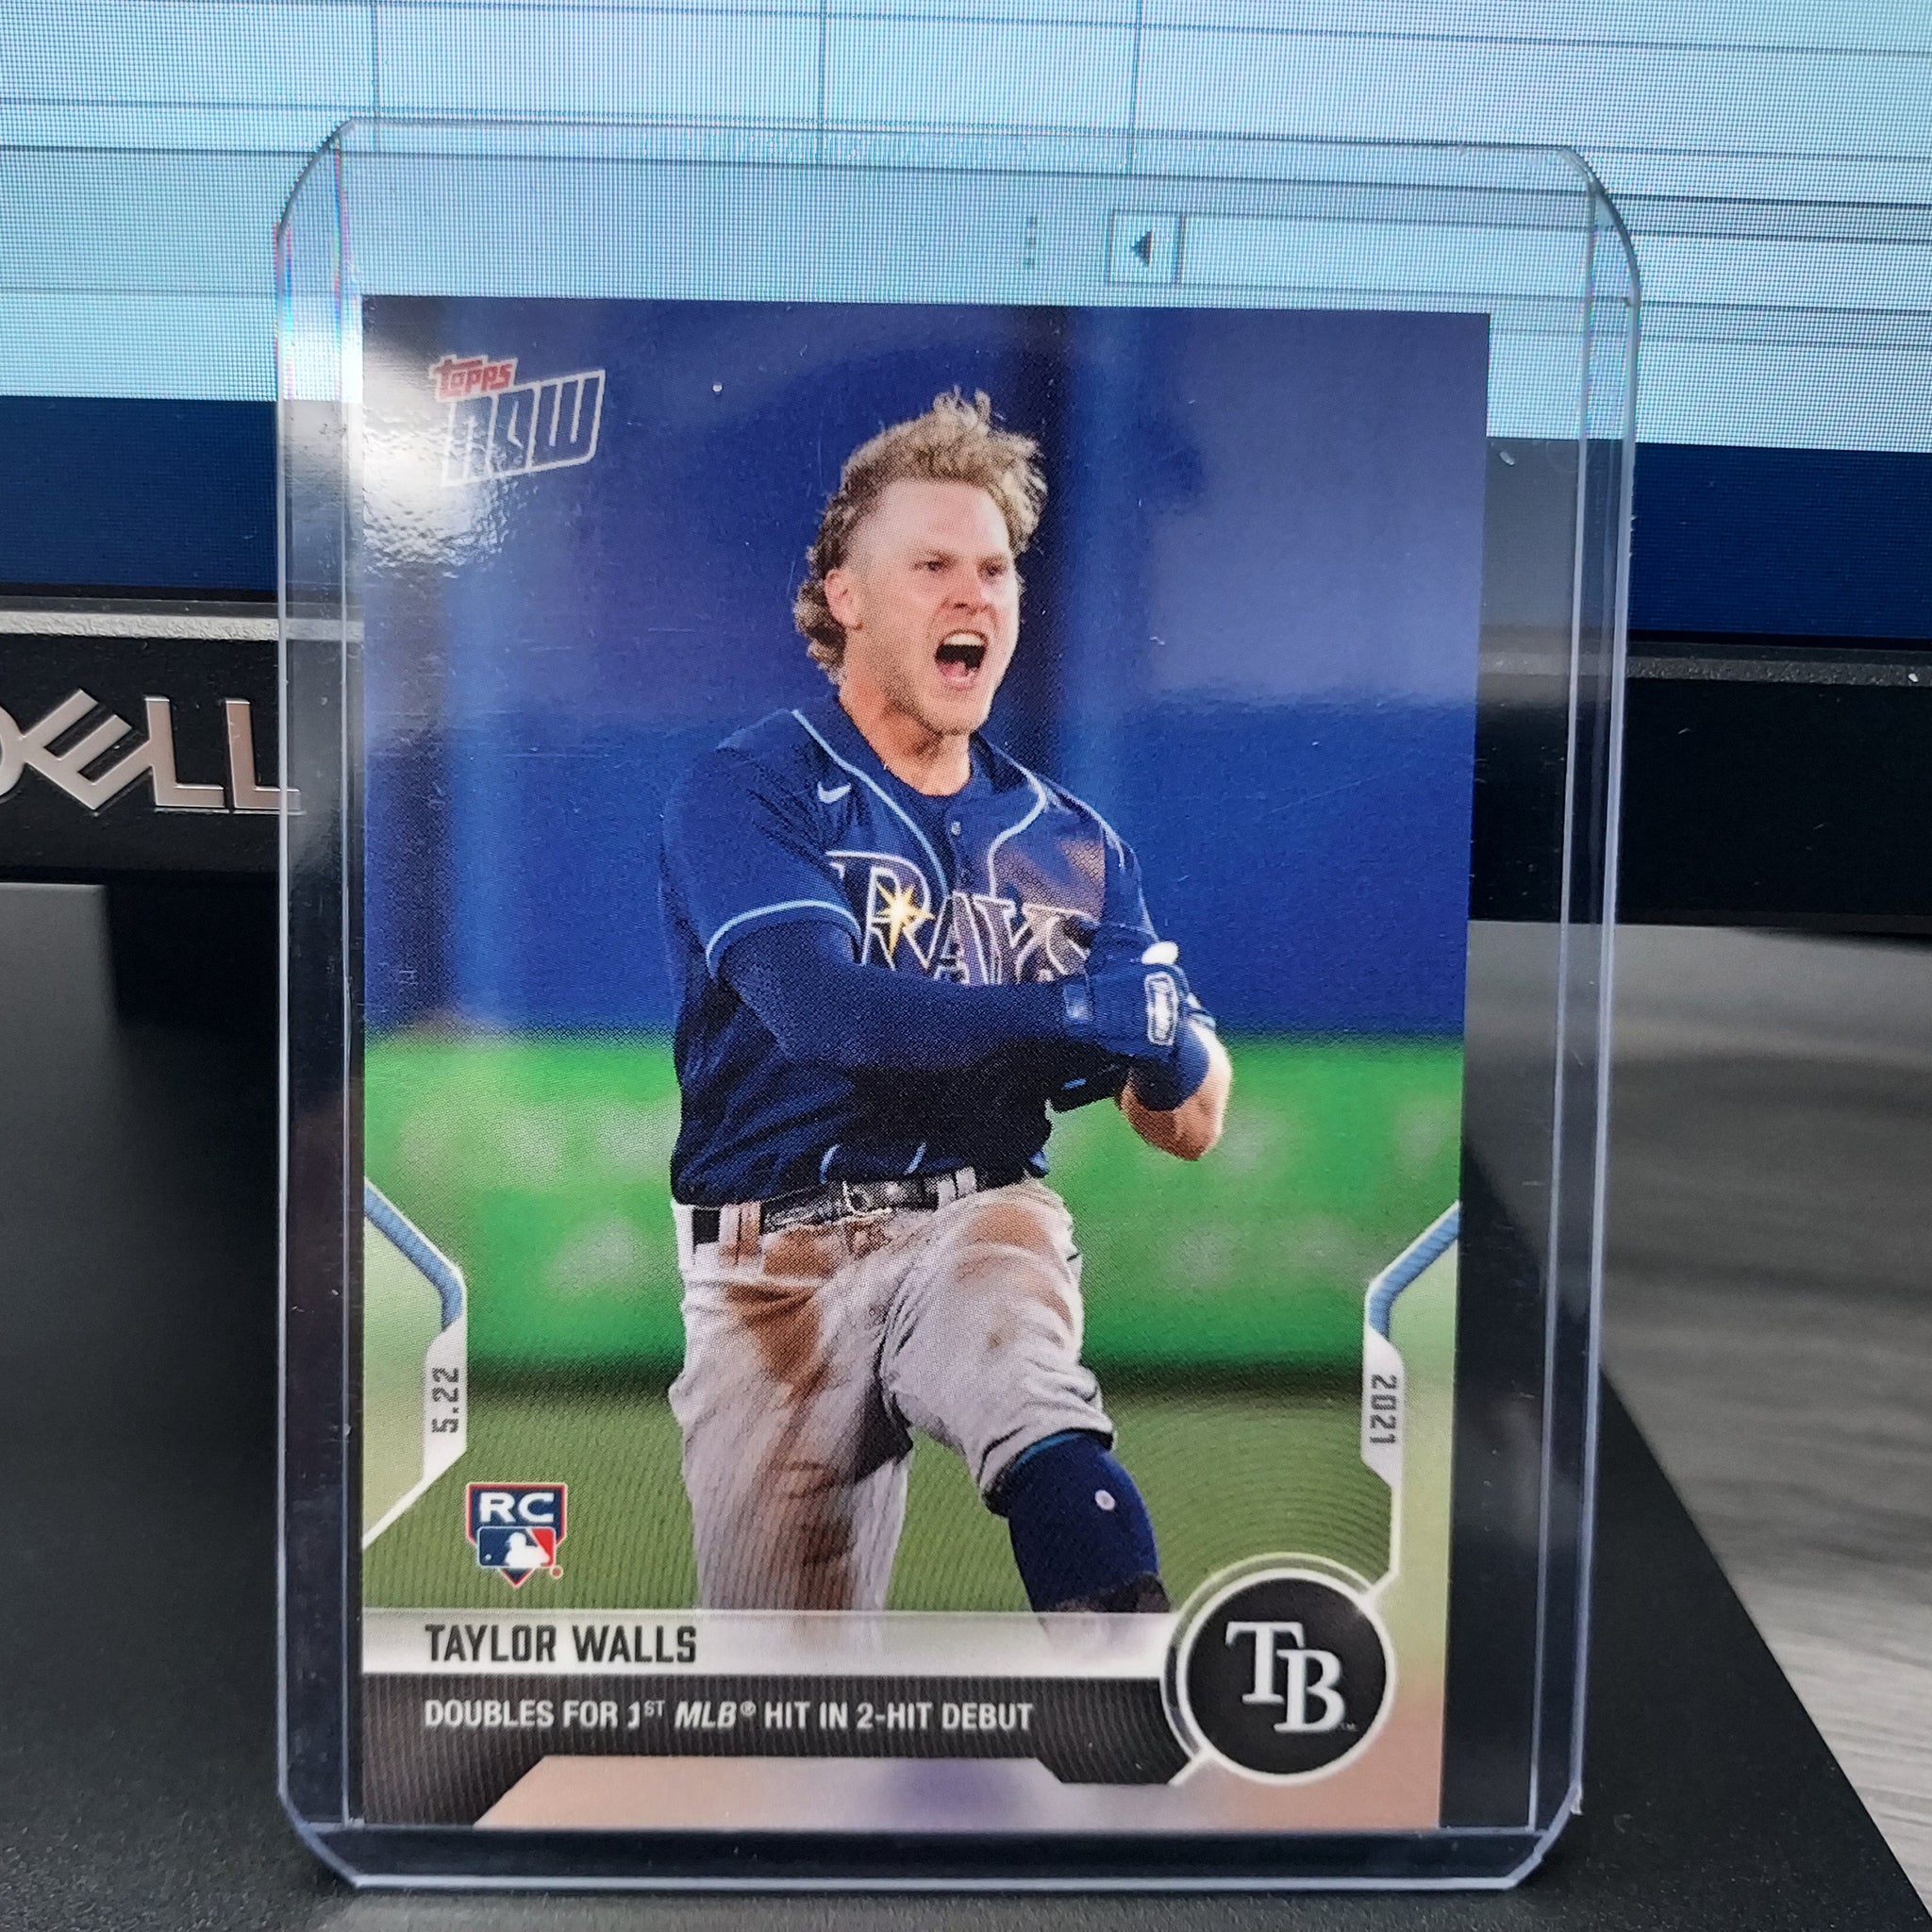 Taylor Walls Doubles for 1st MLB Hit-2021 MLB TOPPS NOW Card 260-Print Run: 995